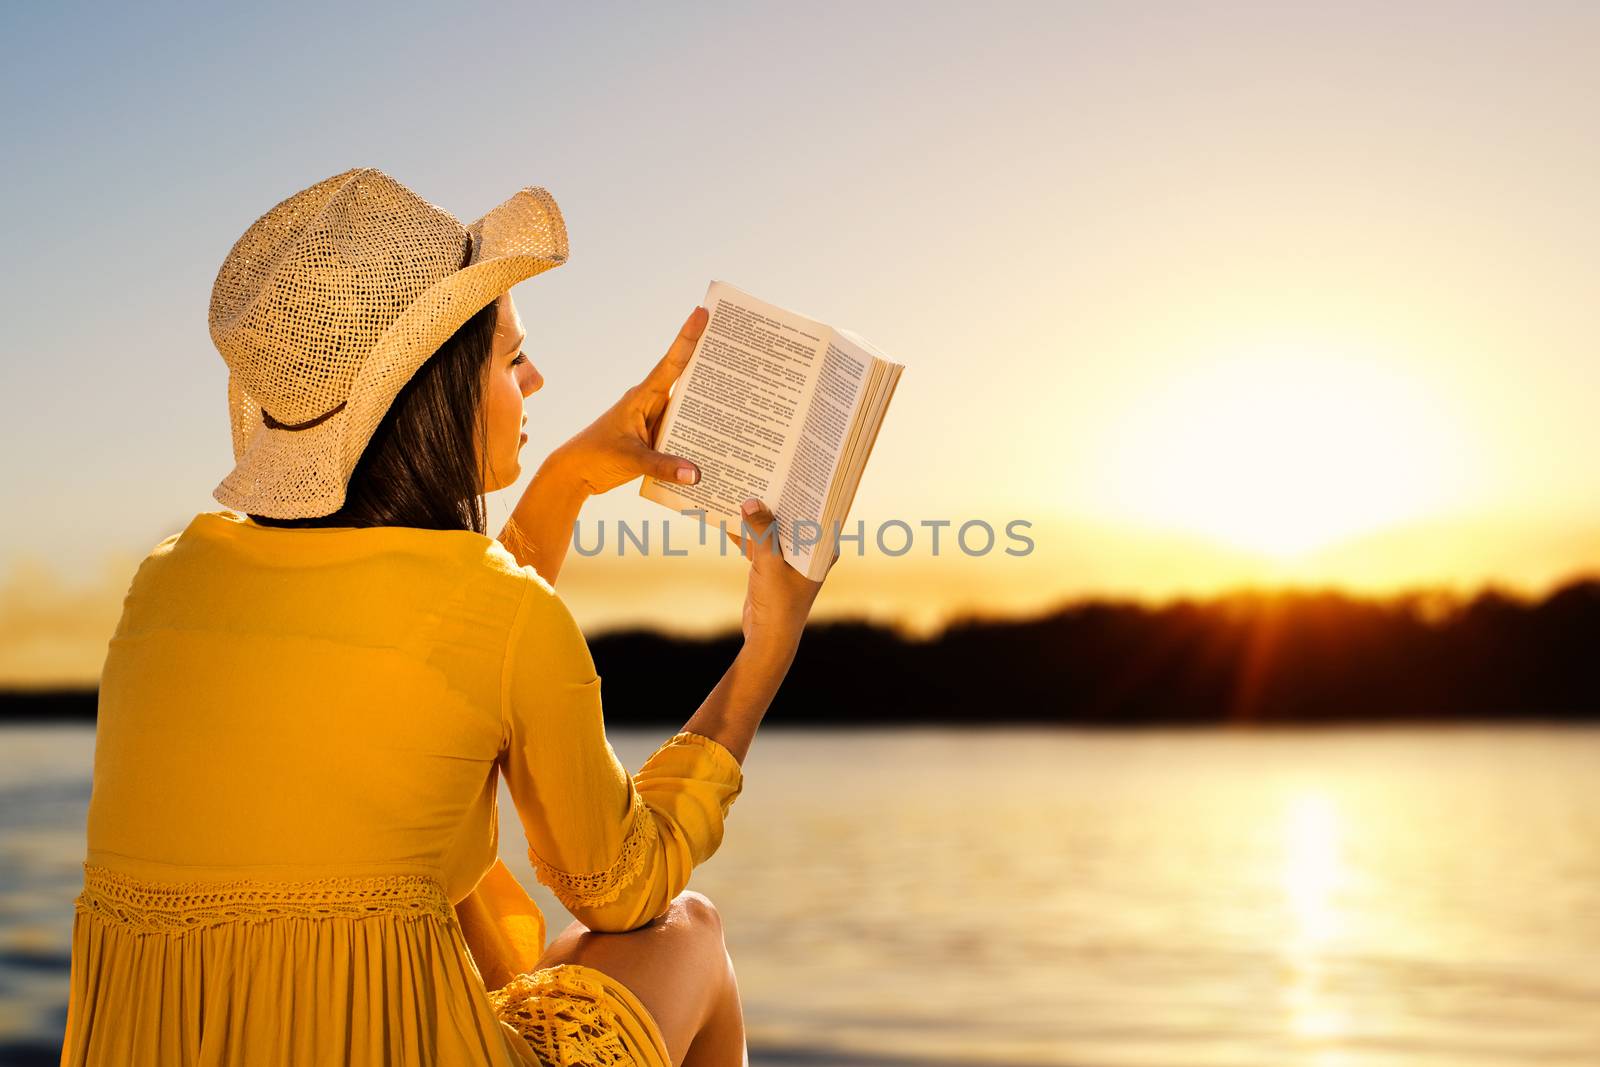 Young woman wearing hat next to river reading a book. Side view of Girl in yellow dress against sunset background.